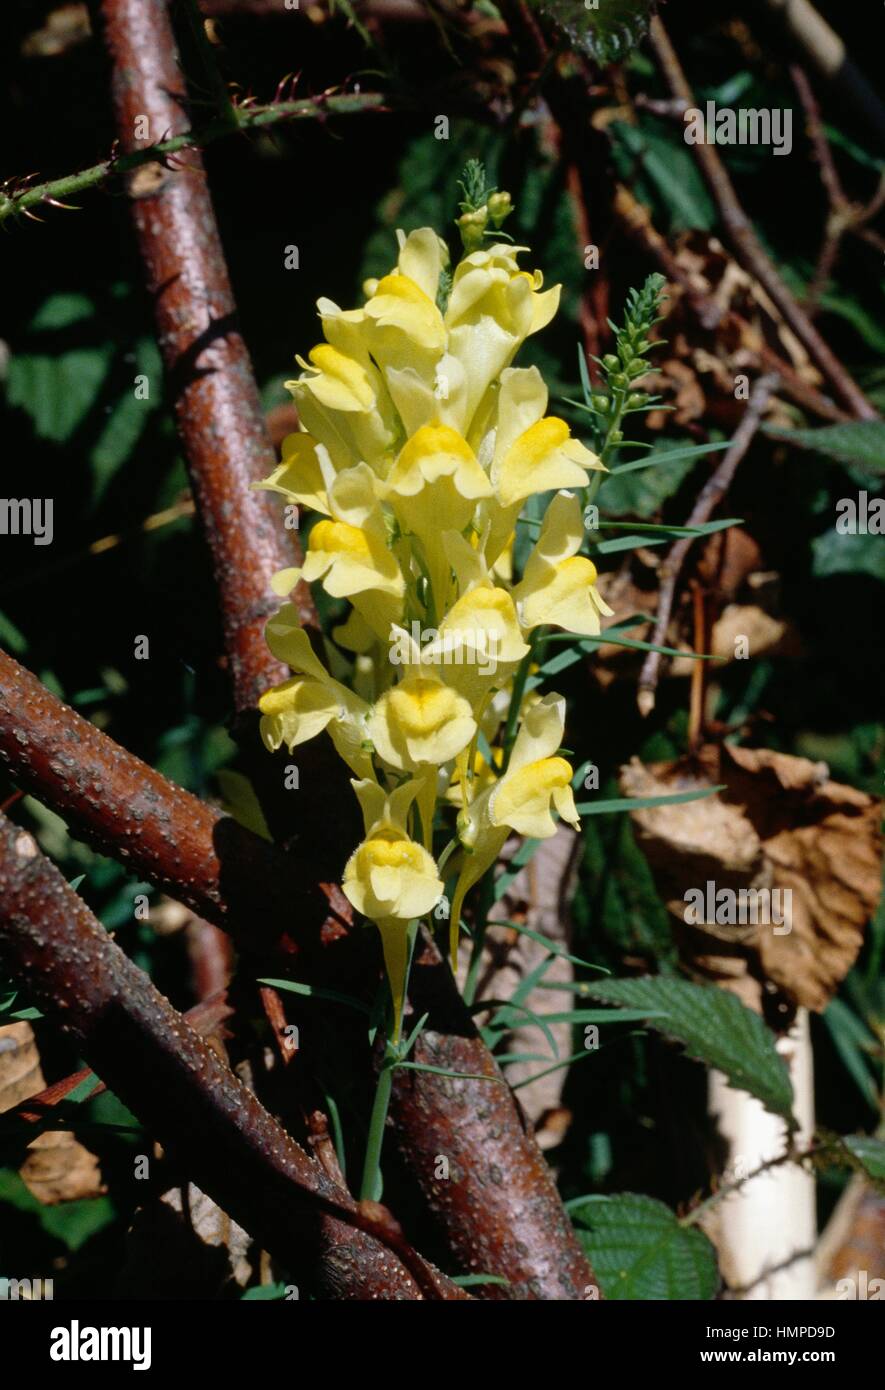 Butter and Eggs or Yellow Toadflax (Linaria vulgaris), Scrophulariaceae. Stock Photo